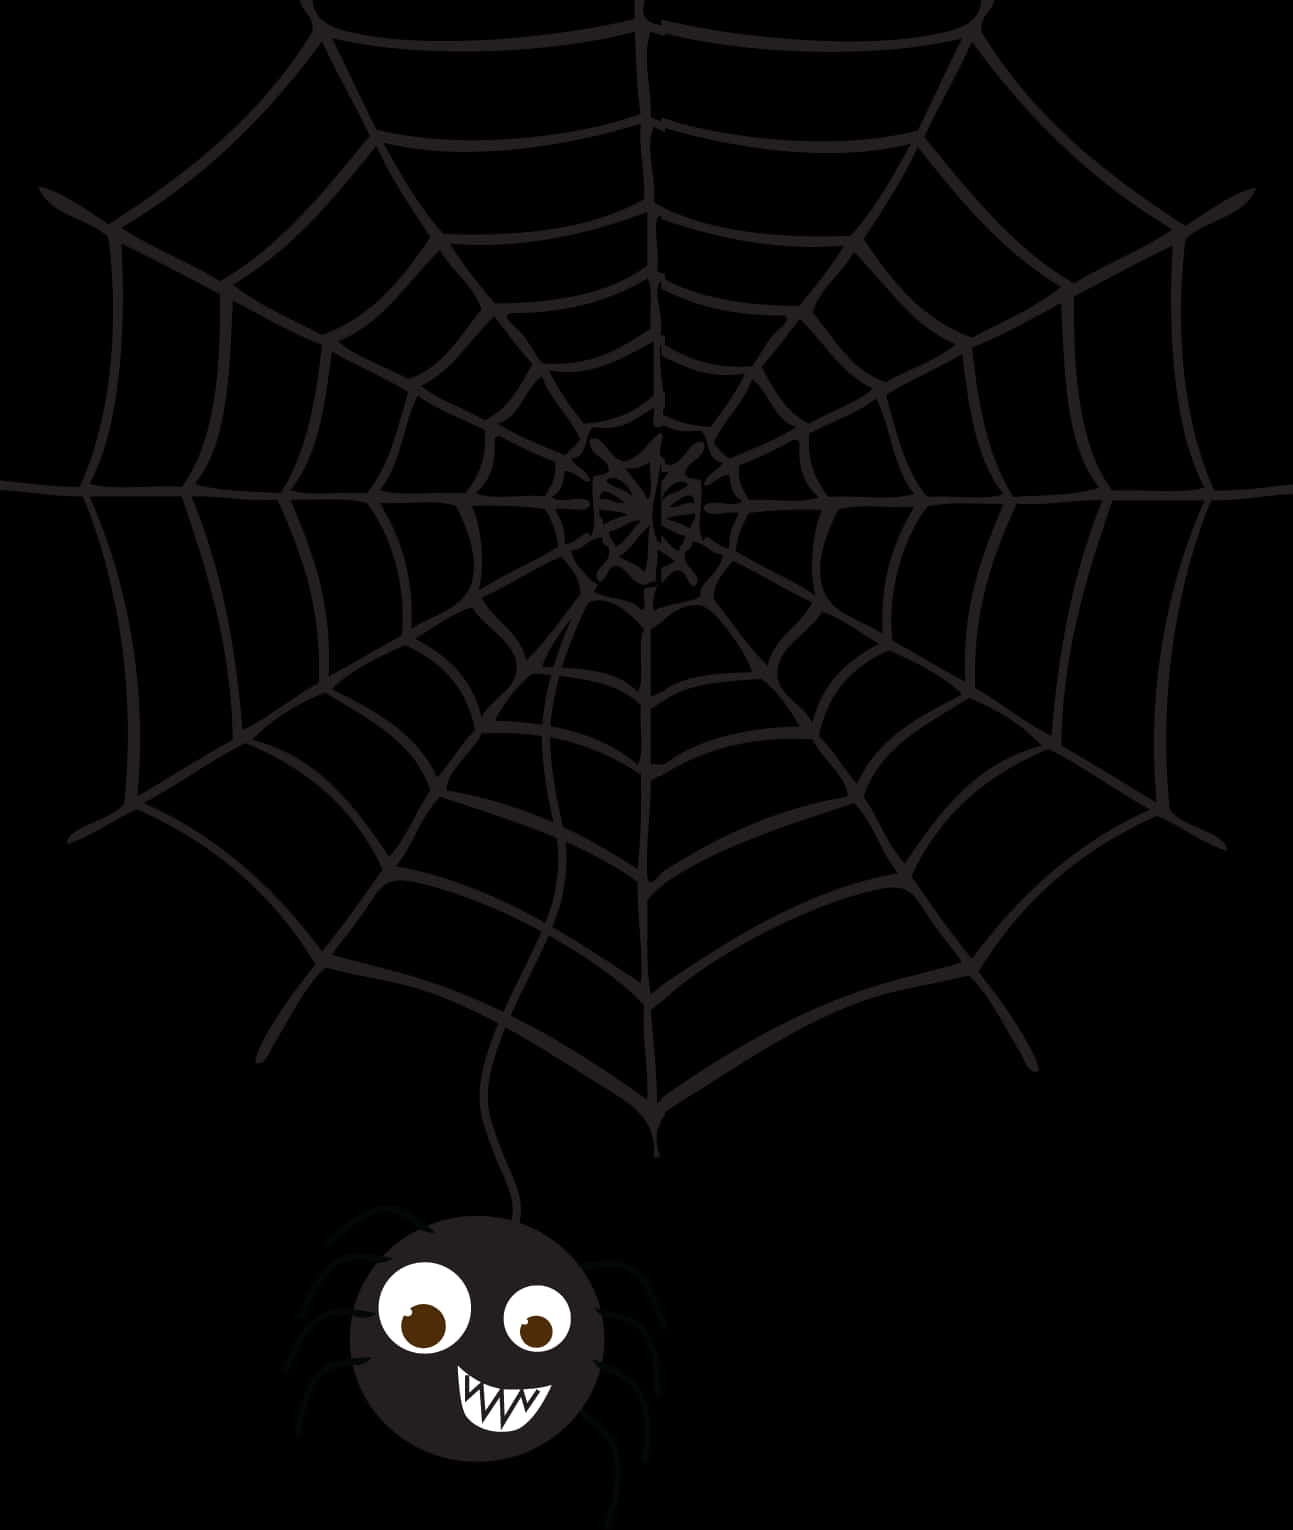 A Spider And Web With Eyes And Mouth